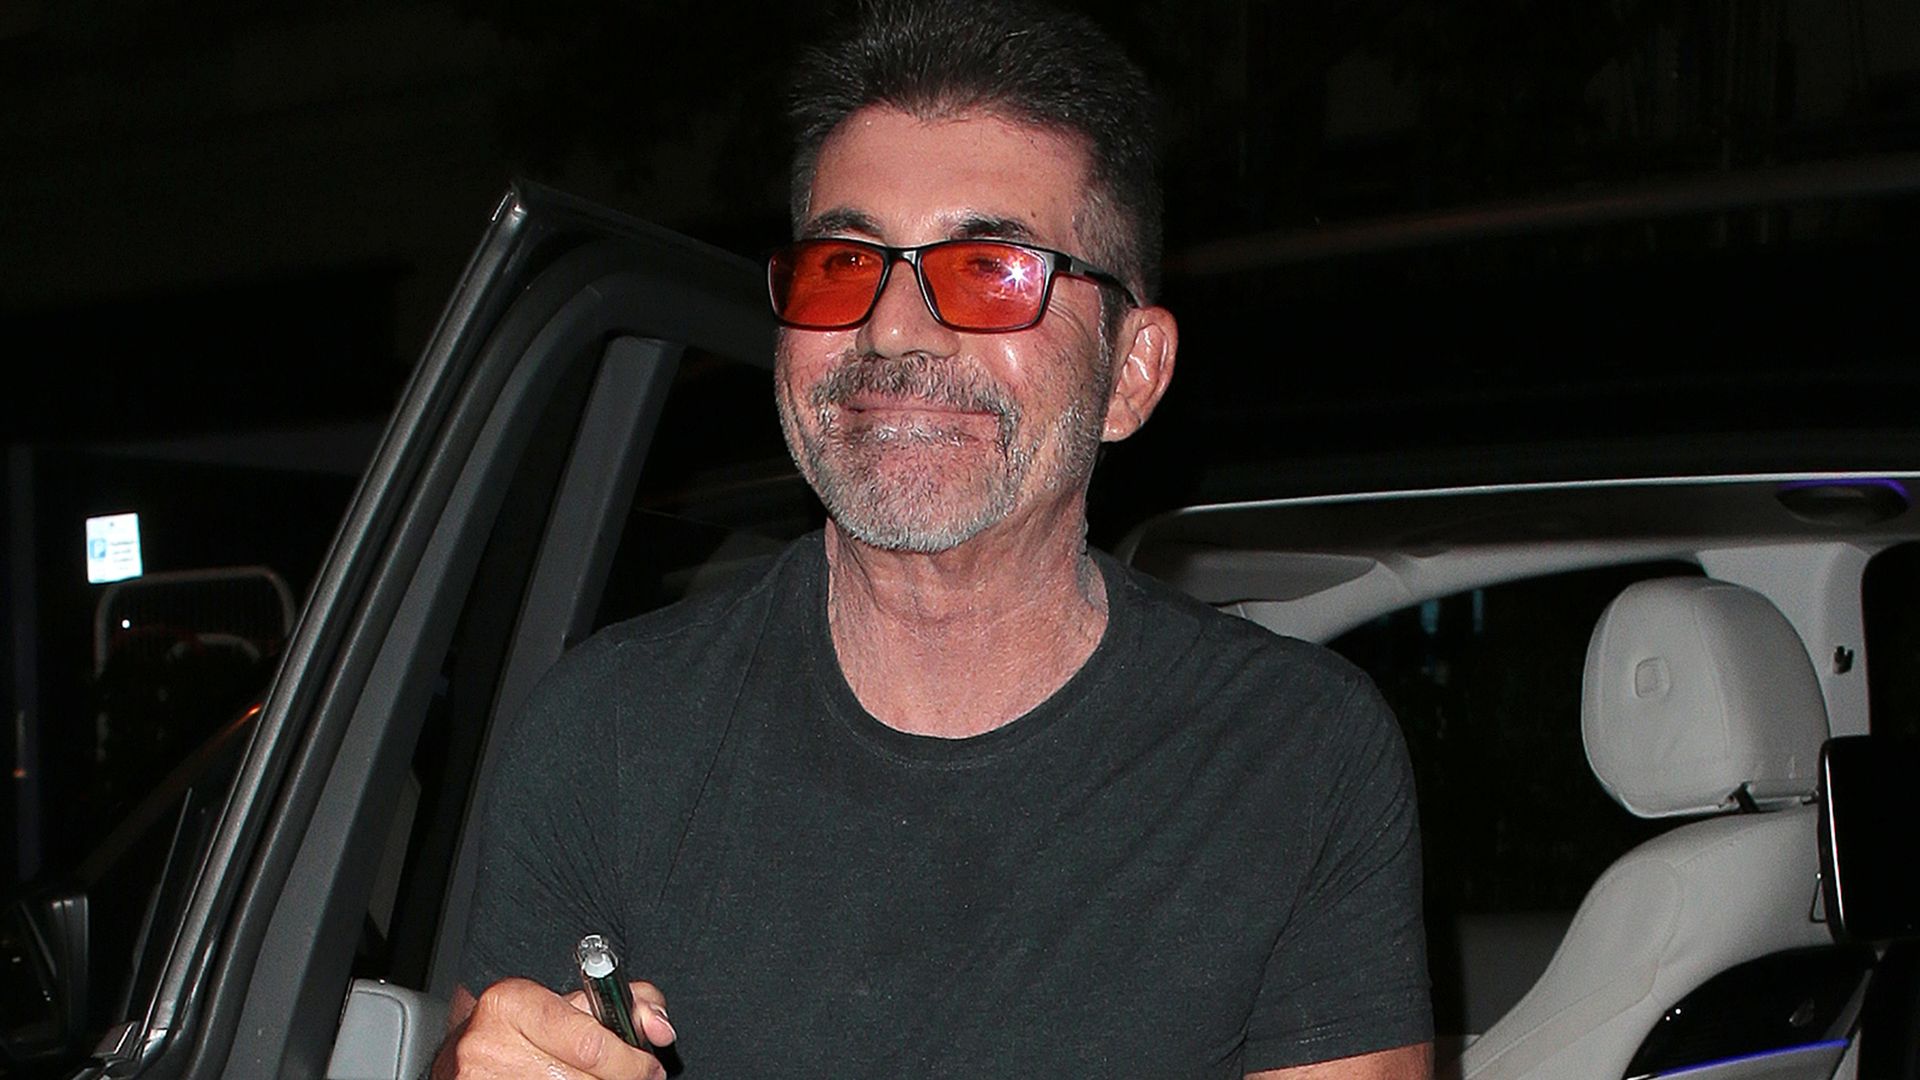 Simon Cowell getting out of a car wearing orange glasses